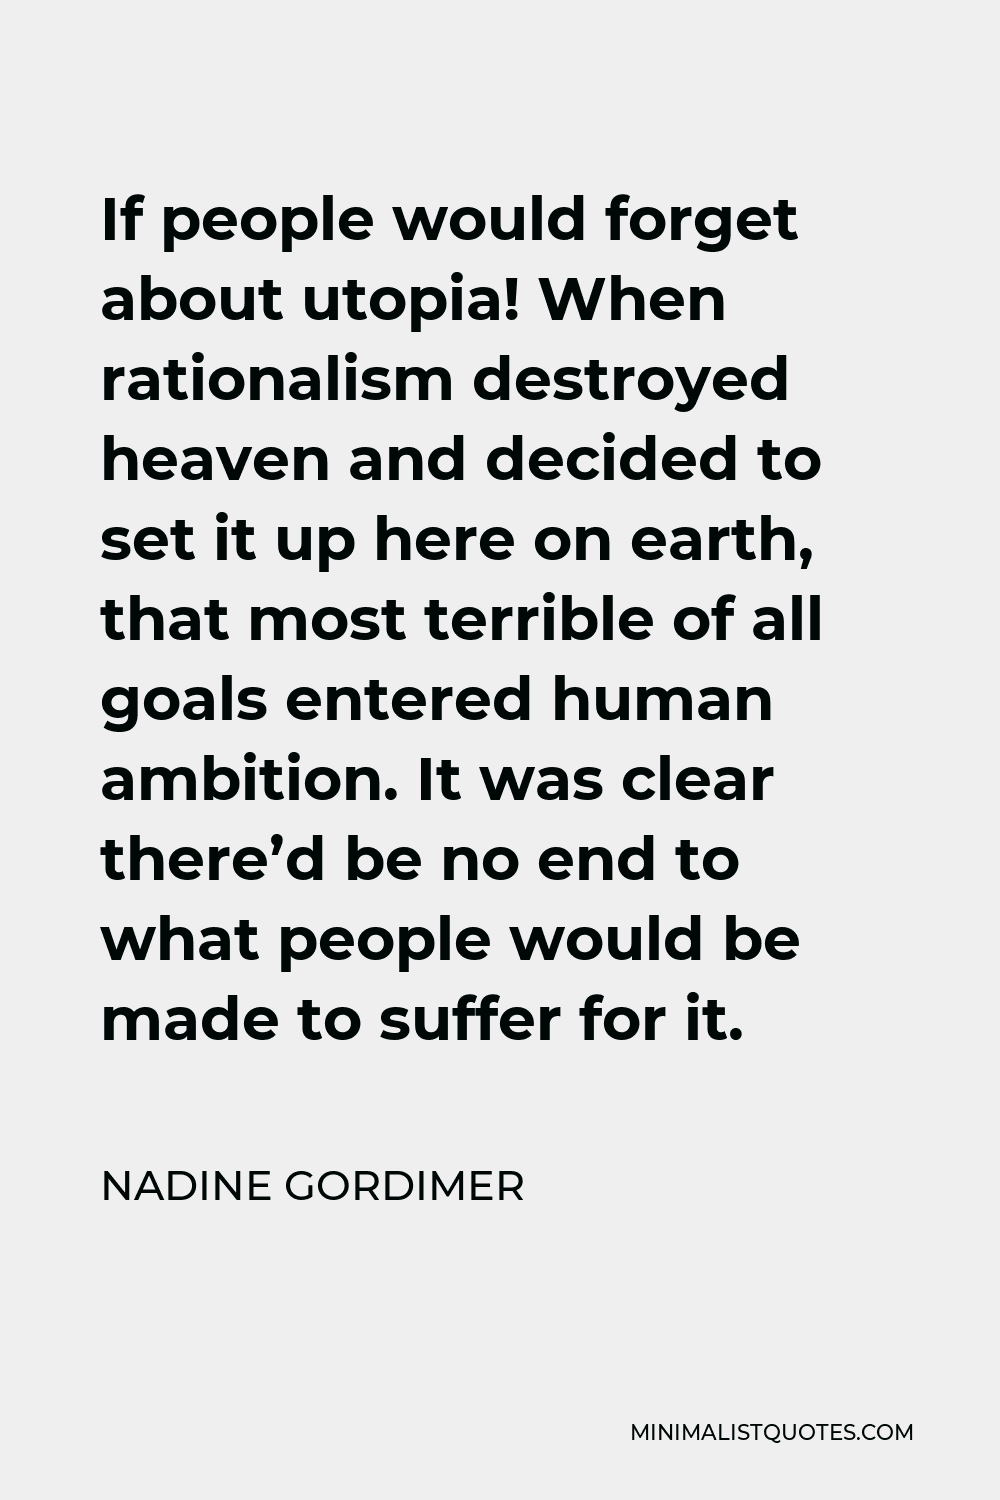 Nadine Gordimer Quote - If people would forget about utopia! When rationalism destroyed heaven and decided to set it up here on earth, that most terrible of all goals entered human ambition. It was clear there’d be no end to what people would be made to suffer for it.